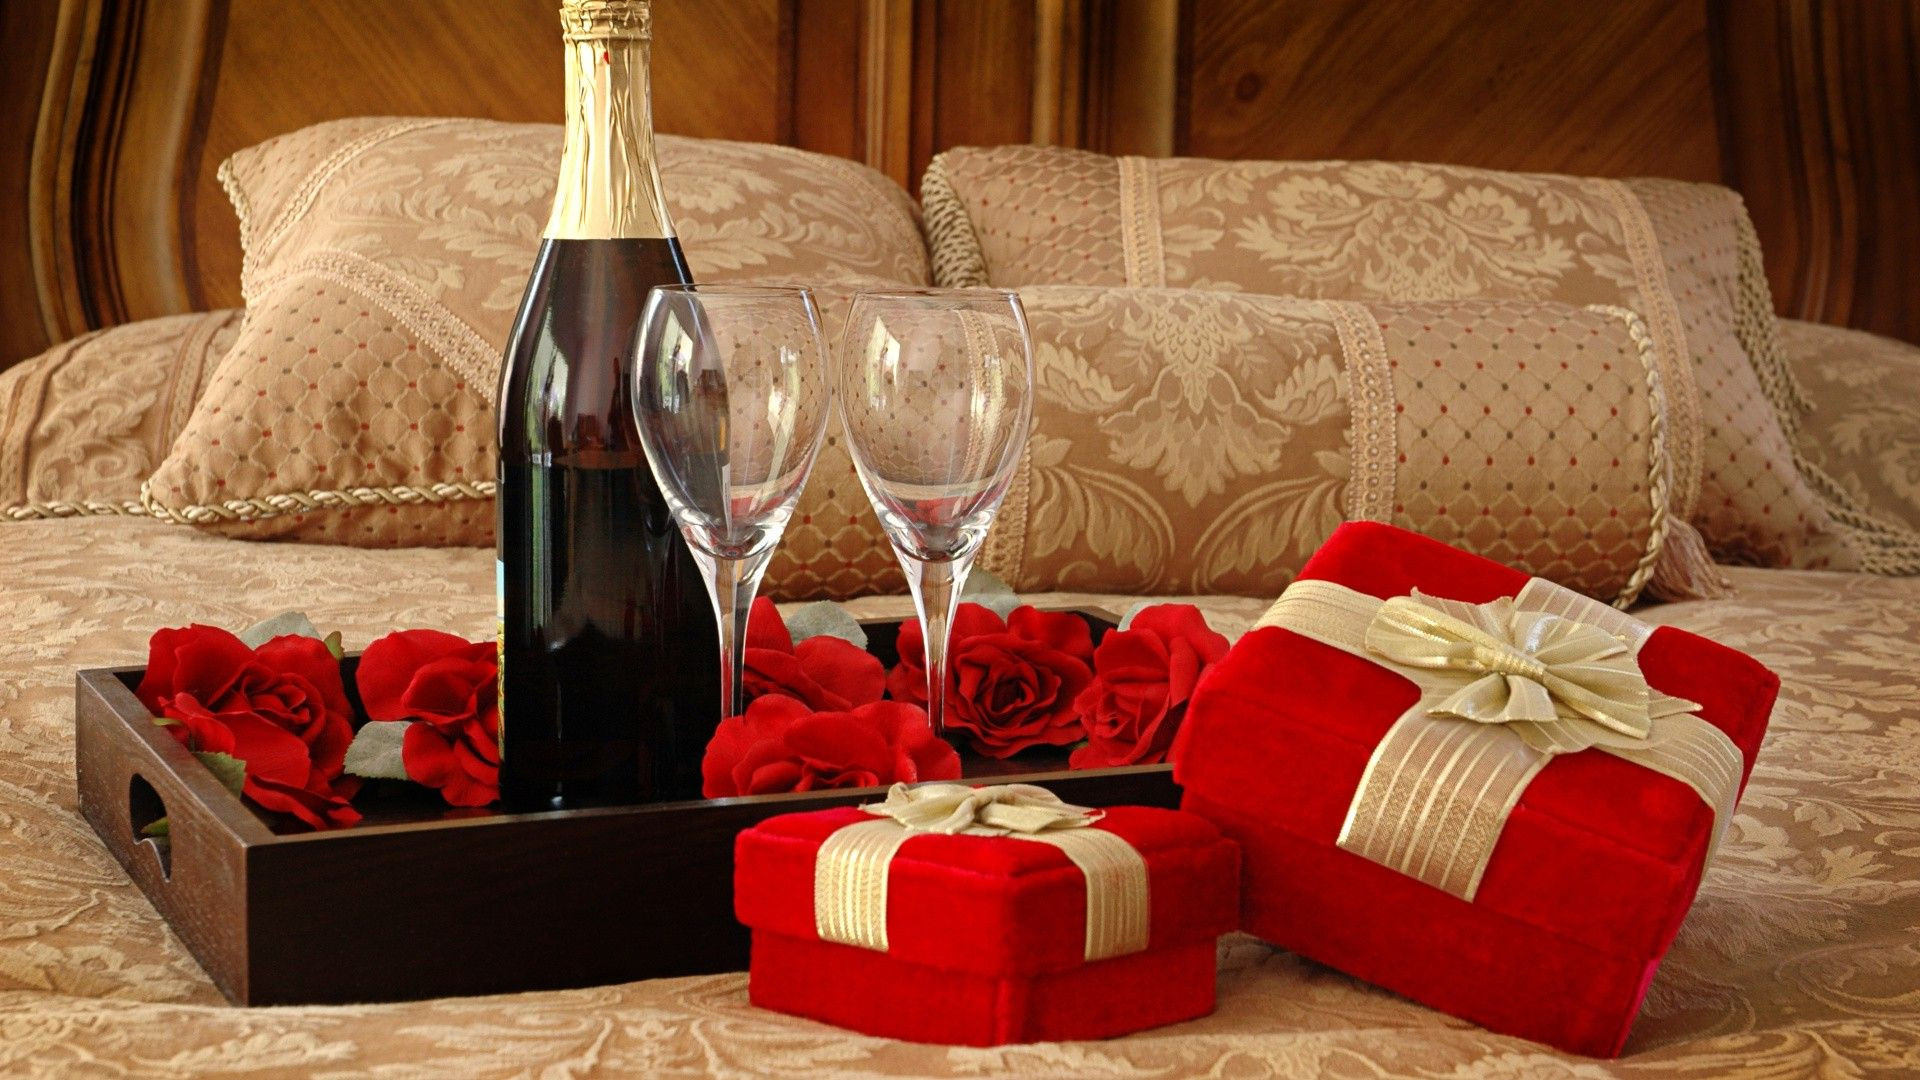 Girlfriend Birthday Gift Ideas Romantic
 What To Get Your Girlfriend For Her Birthday